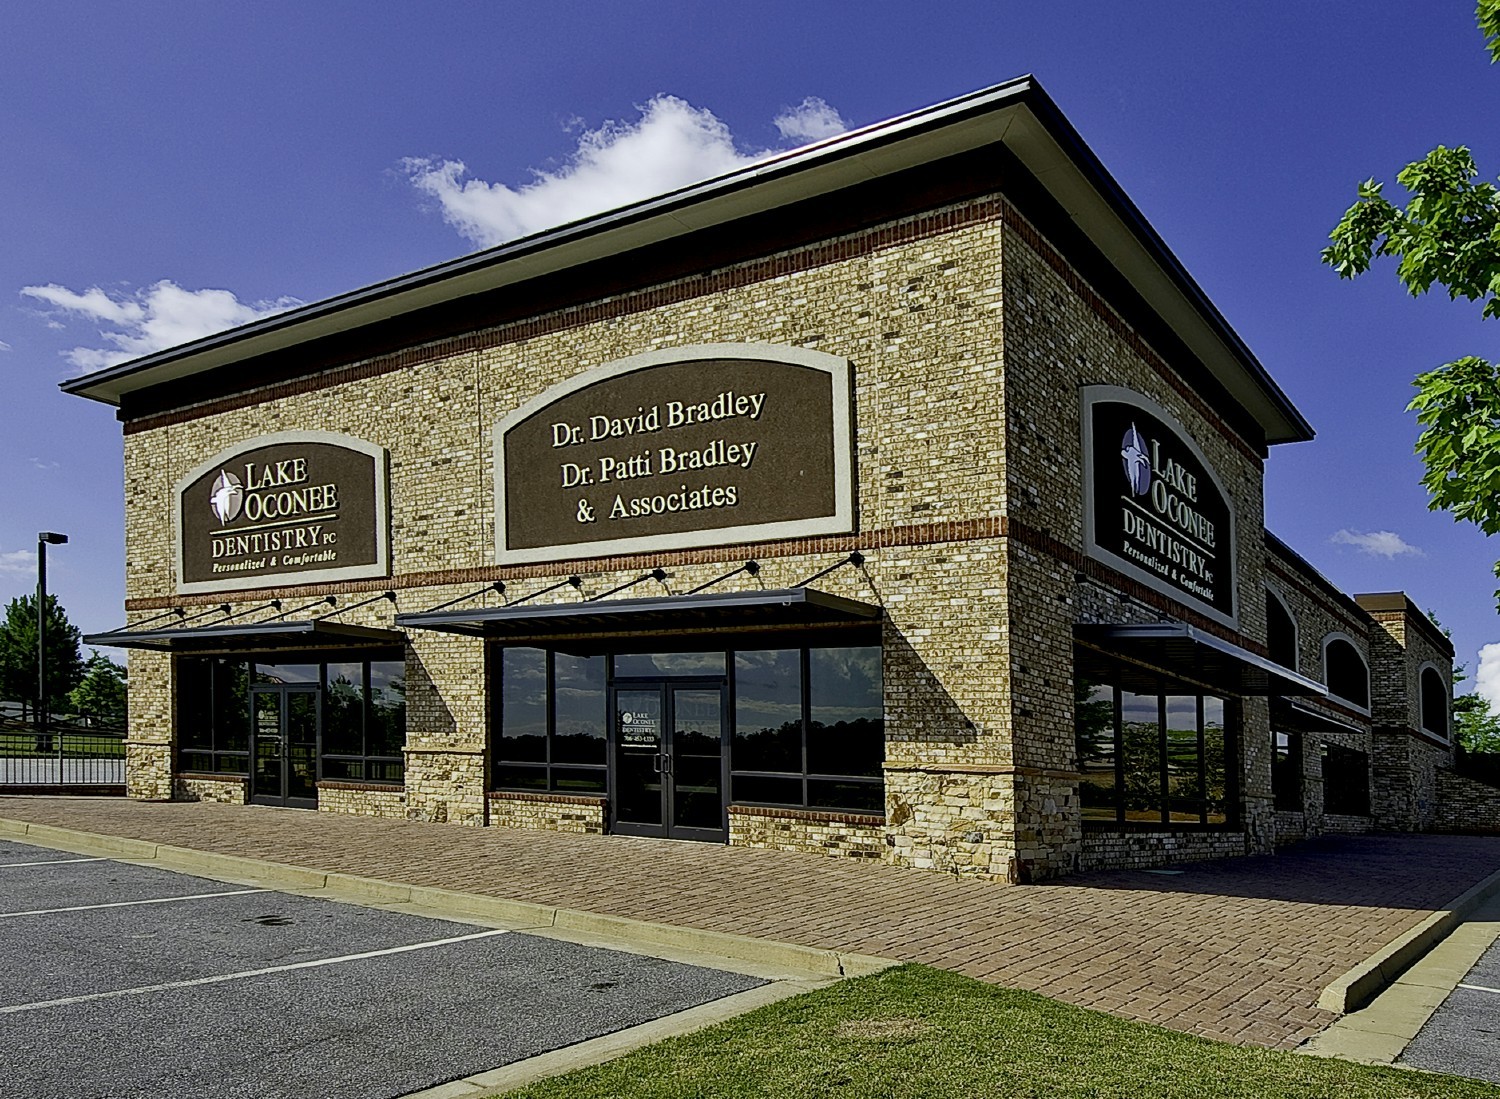 Lake Oconee Dentistry is a large privately-owned dental practice located in Greensboro, Georgia.